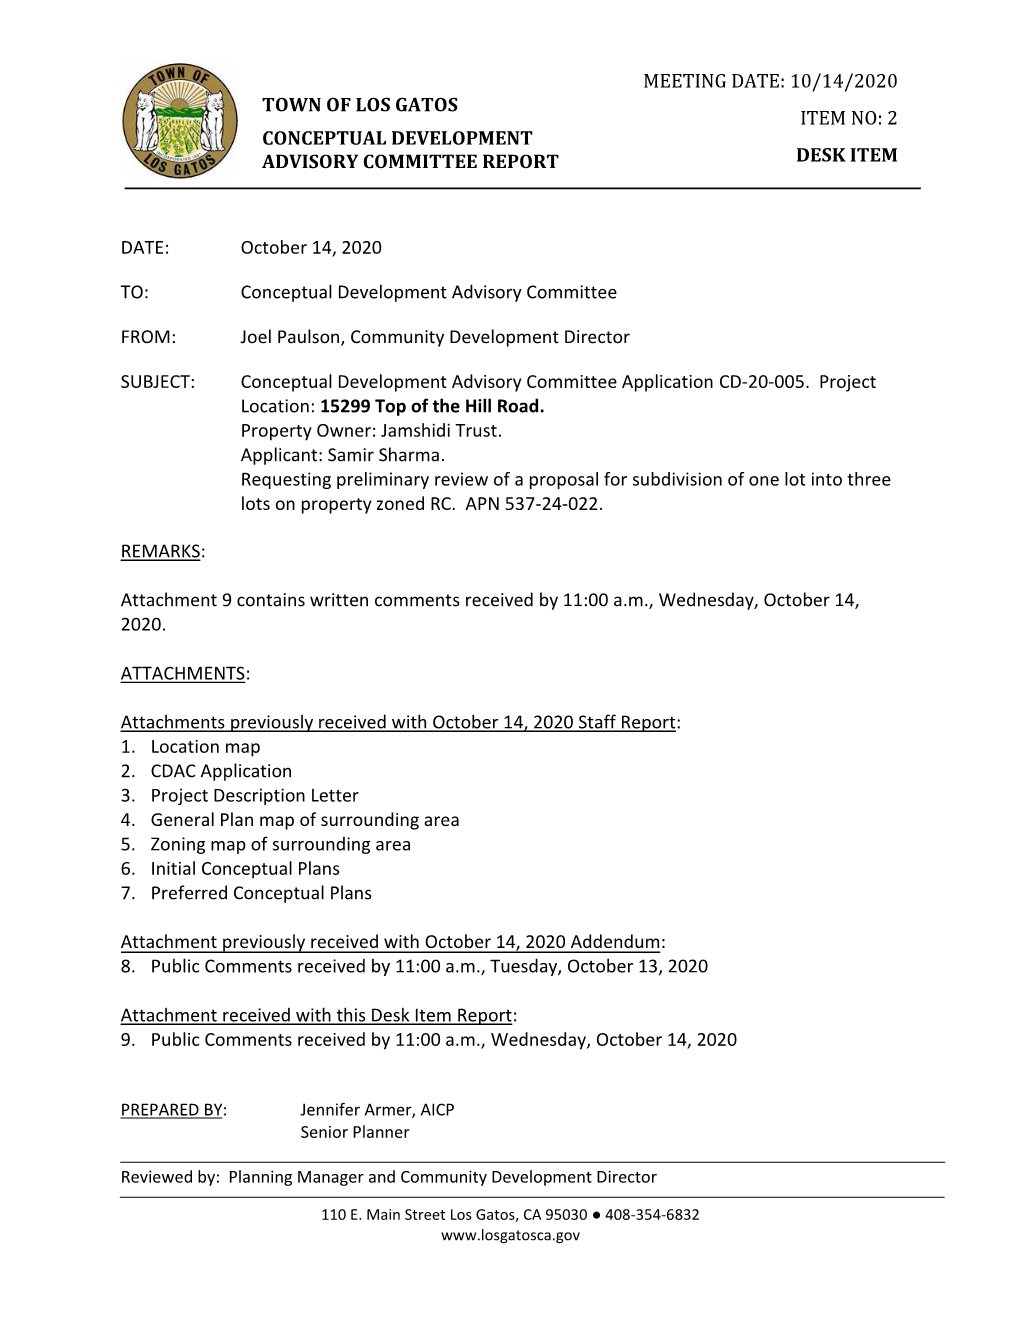 TOWN of LOS GATOS CONCEPTUAL DEVELOPMENT ADVISORY COMMITTEE REPORT MEETING DATE: 10/14/2020 ITEM NO: 2 DESK ITEM DATE: October